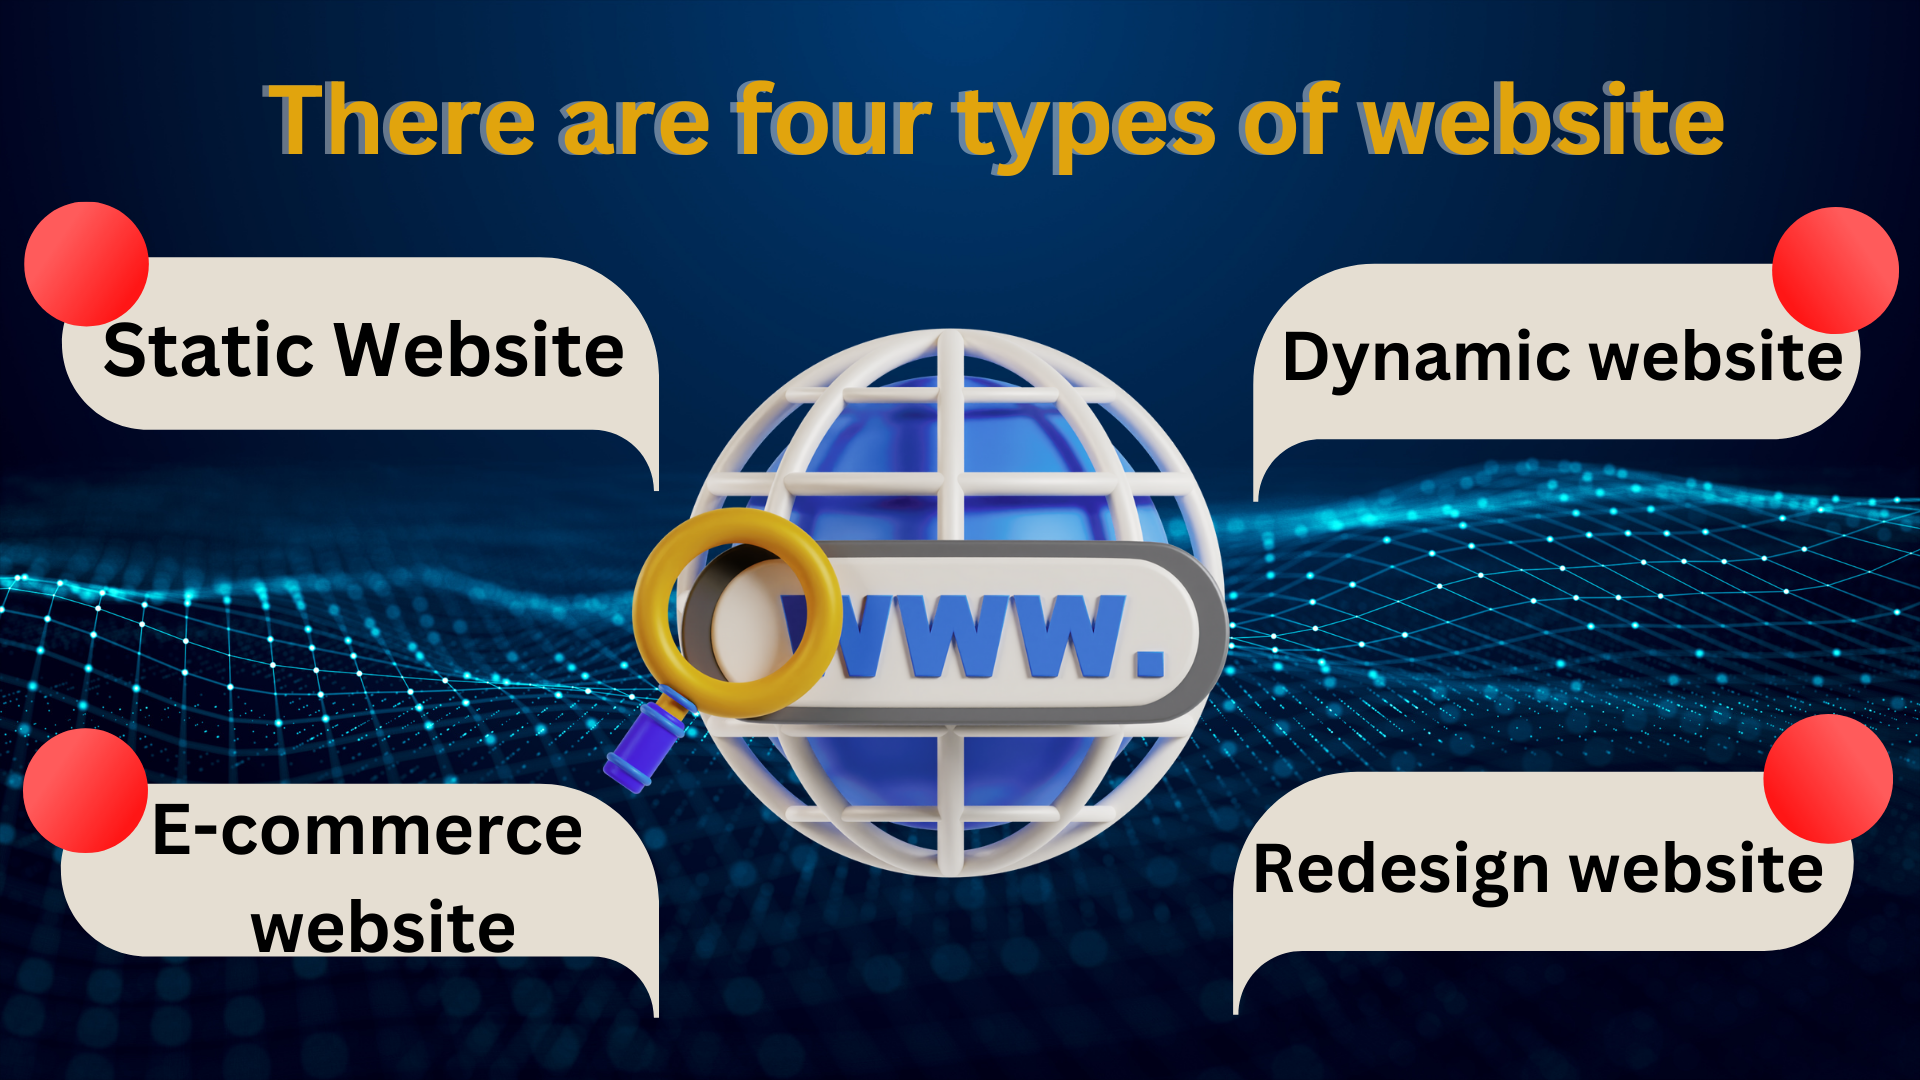 There are four types of websites